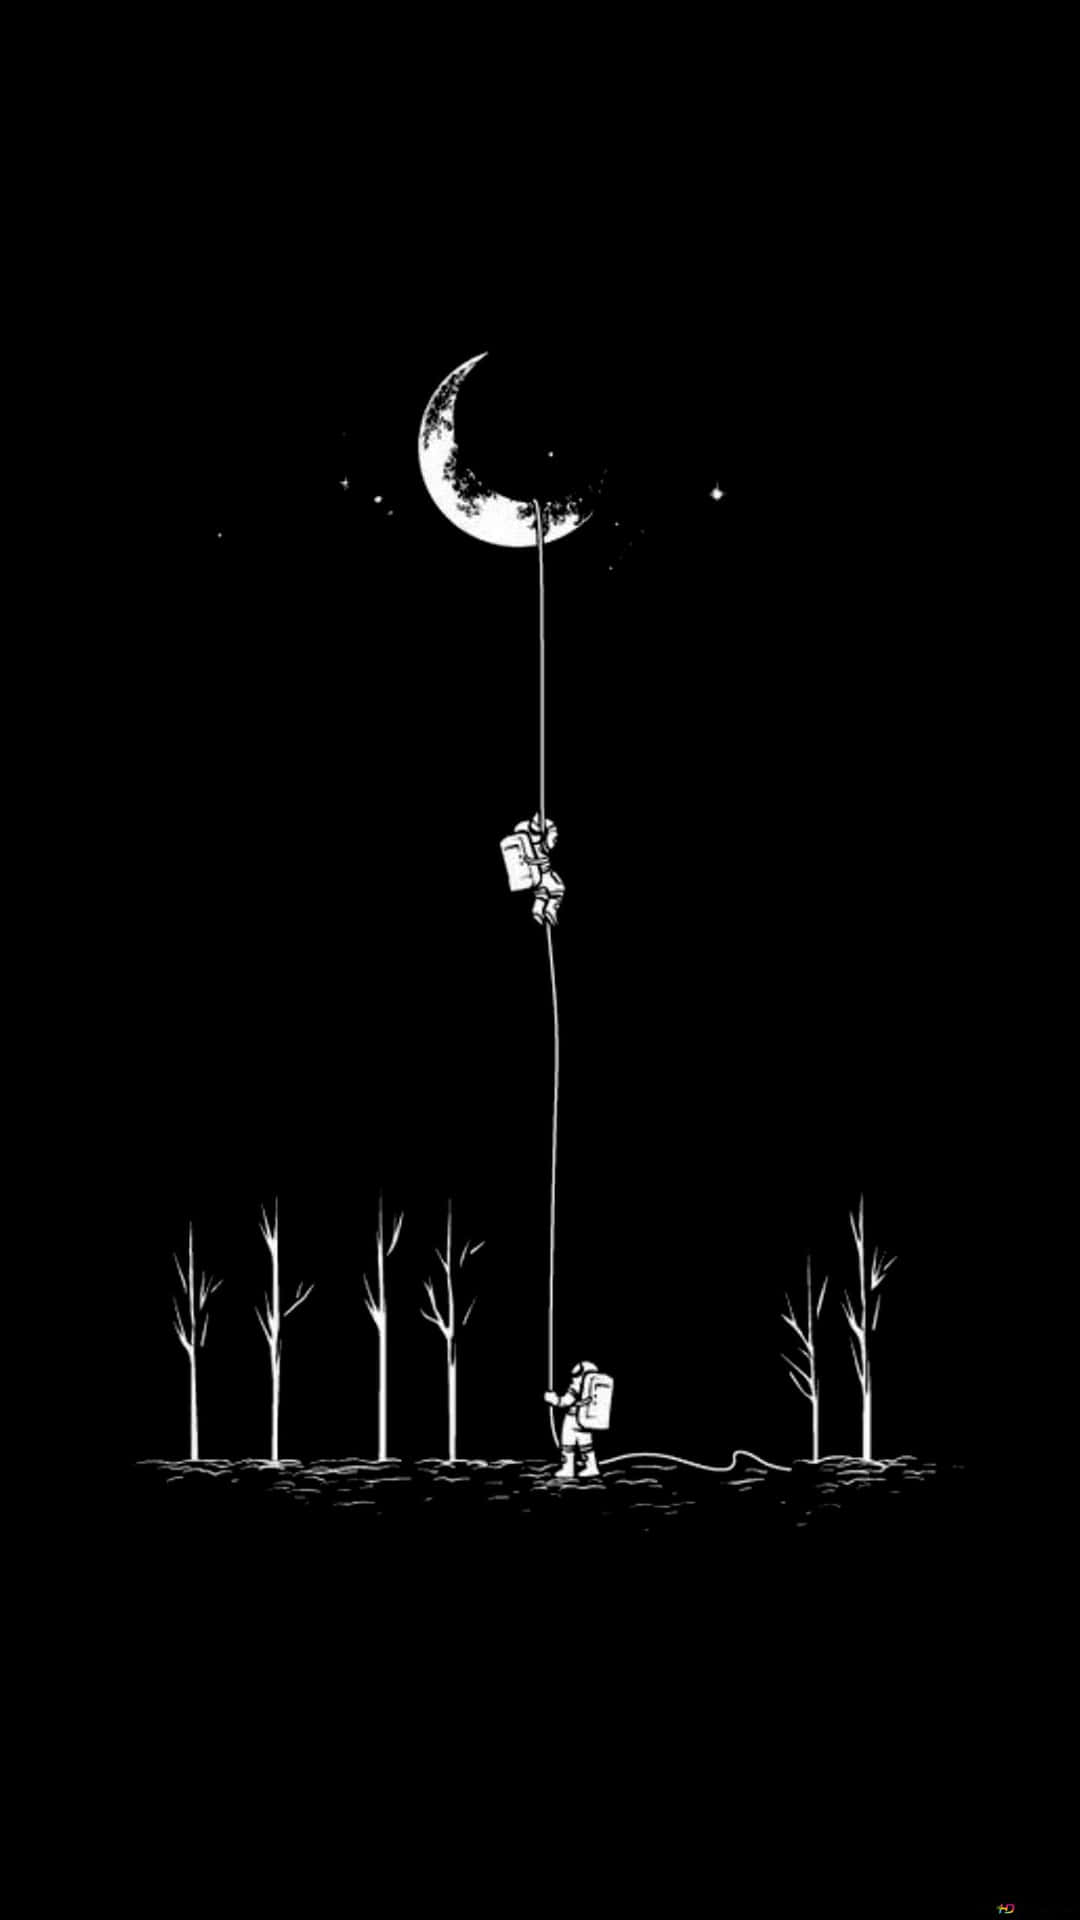 A Man Is Hanging From A Rope In The Dark